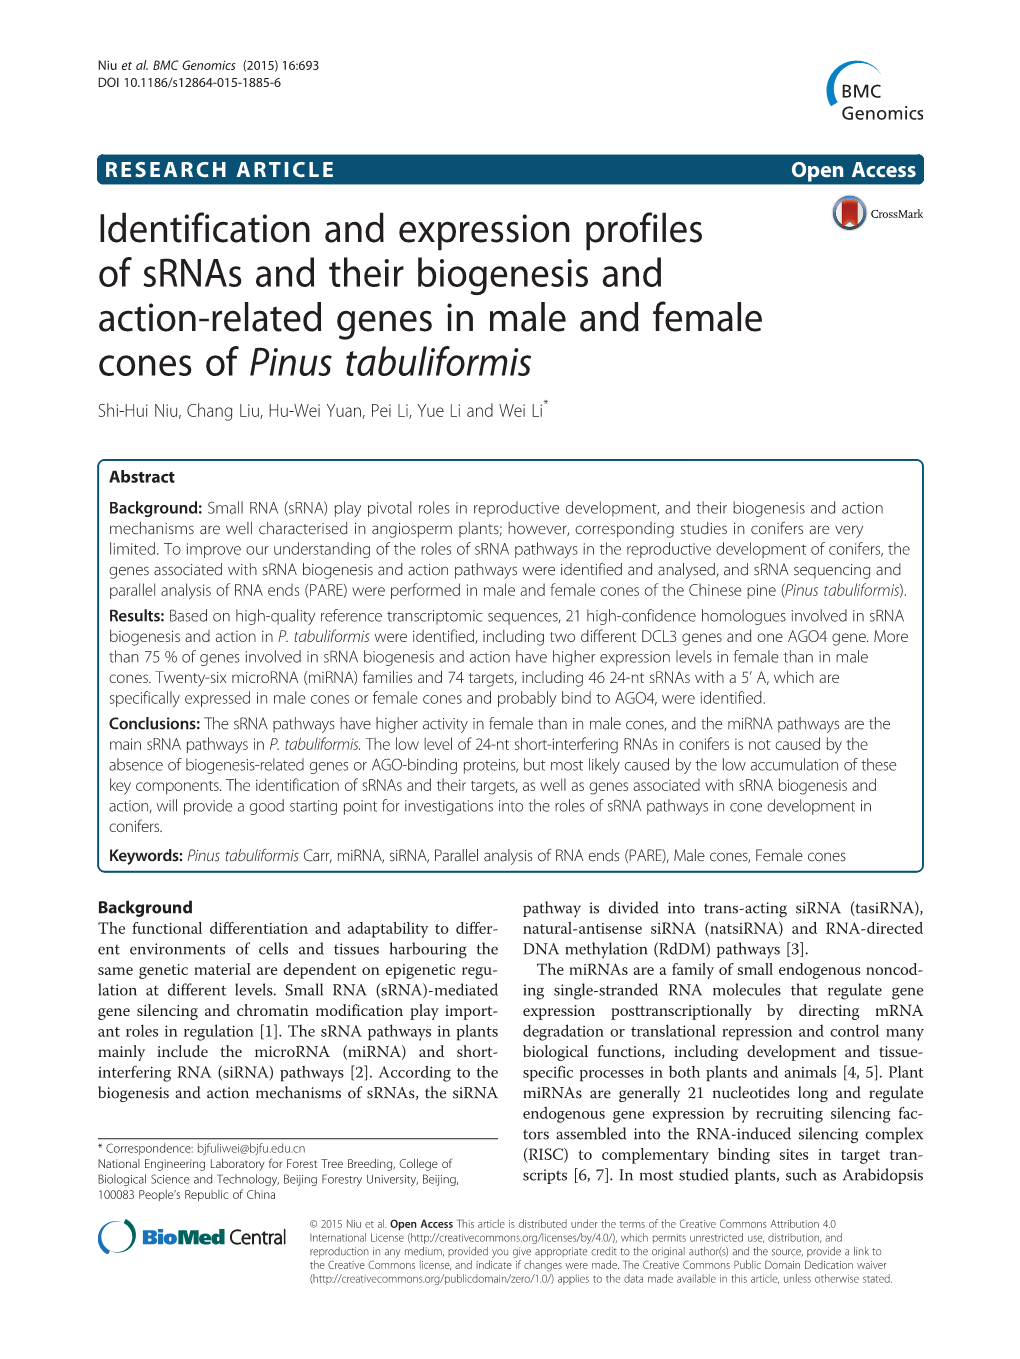 Identification and Expression Profiles of Srnas and Their Biogenesis And